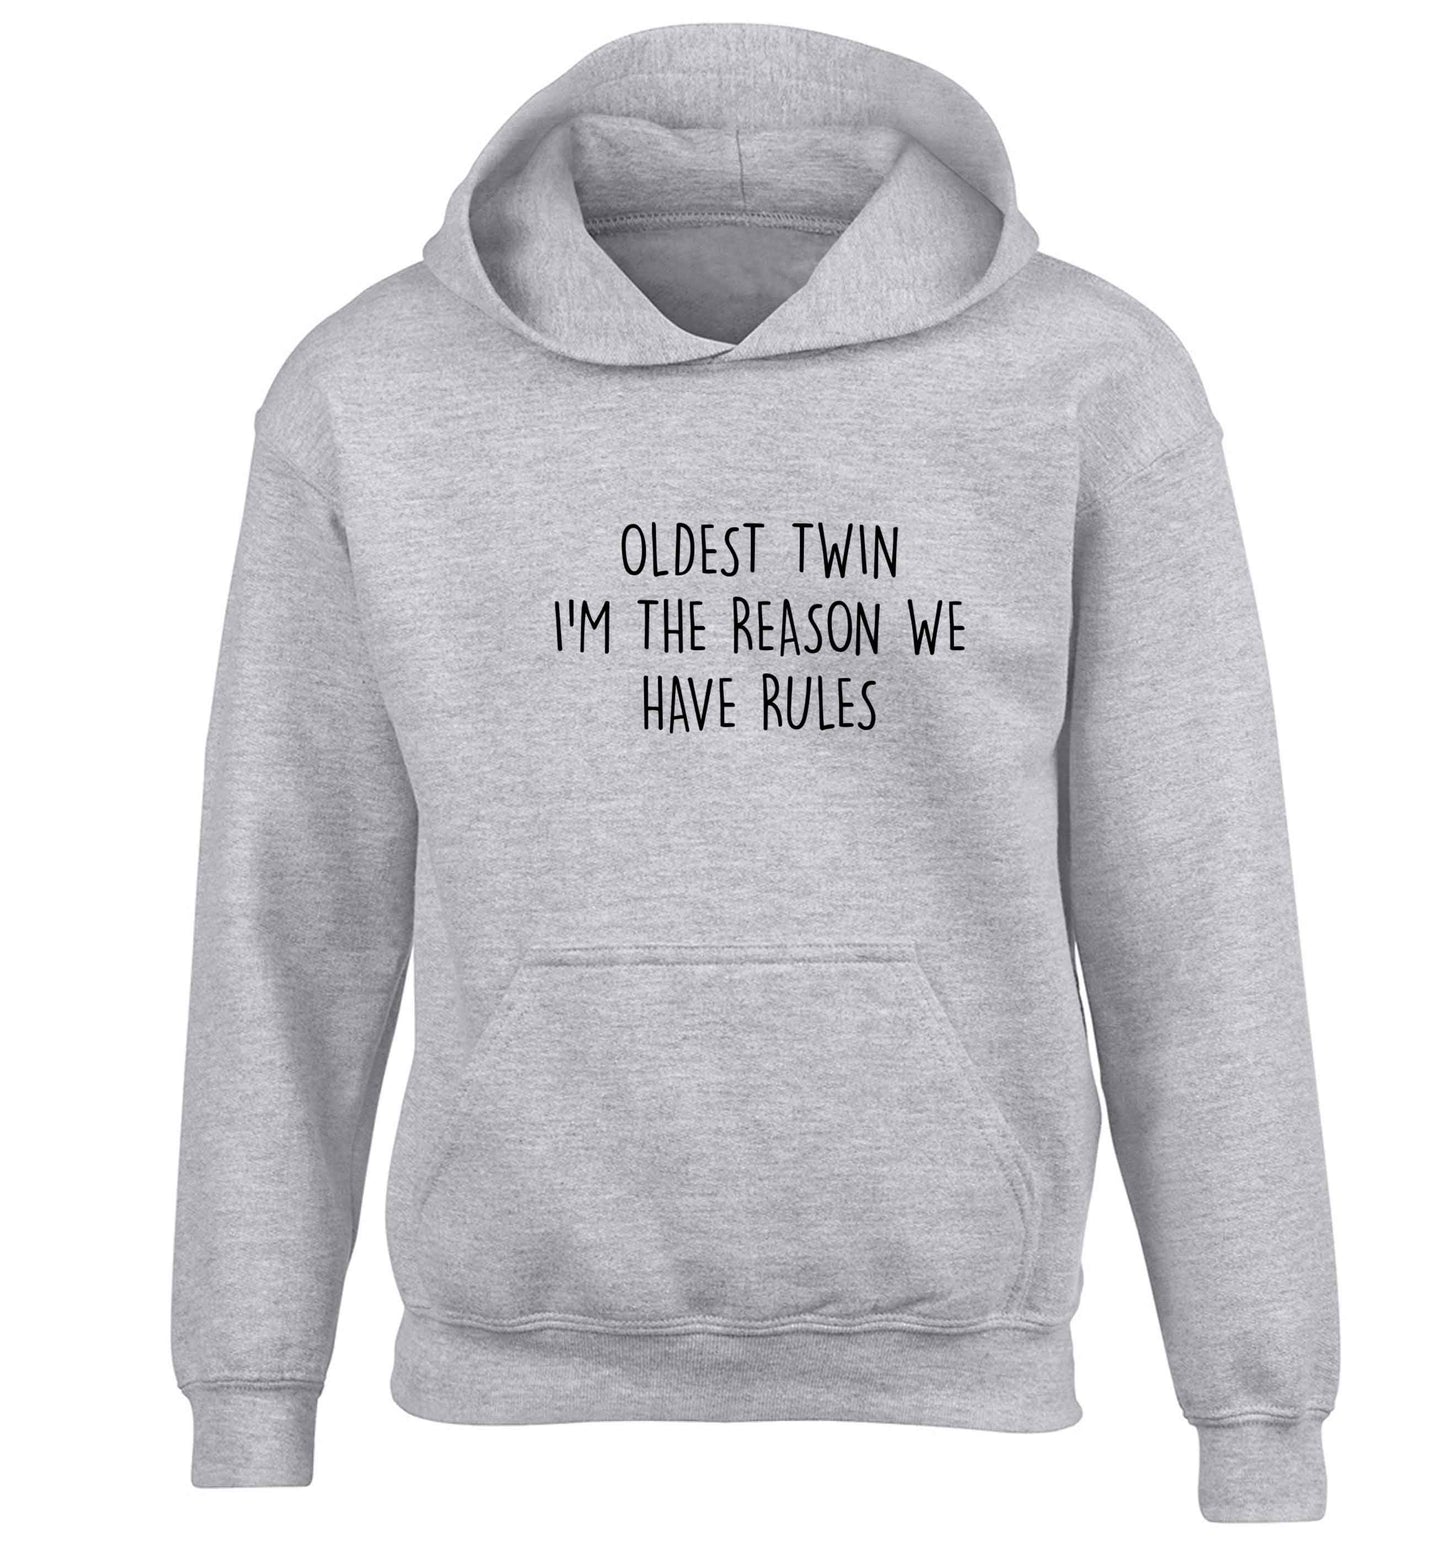 Oldest twin I'm the reason we have rules children's grey hoodie 12-13 Years